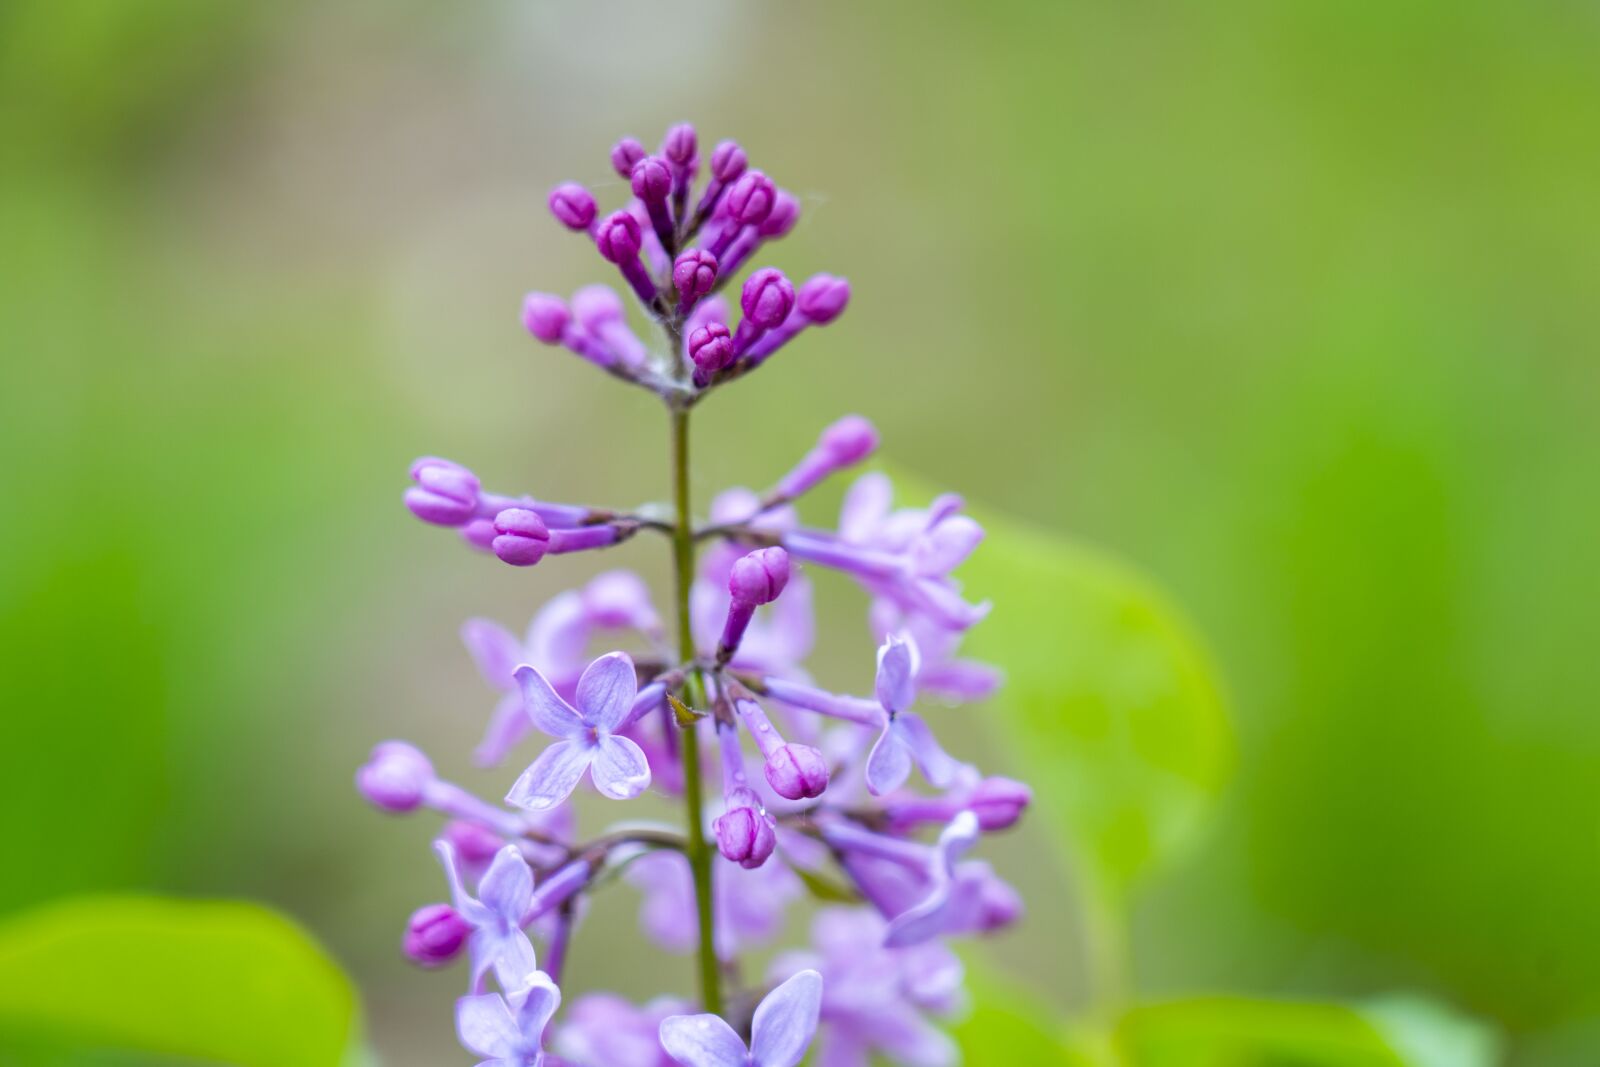 Sony a7 III sample photo. Lilac, nature, spring photography